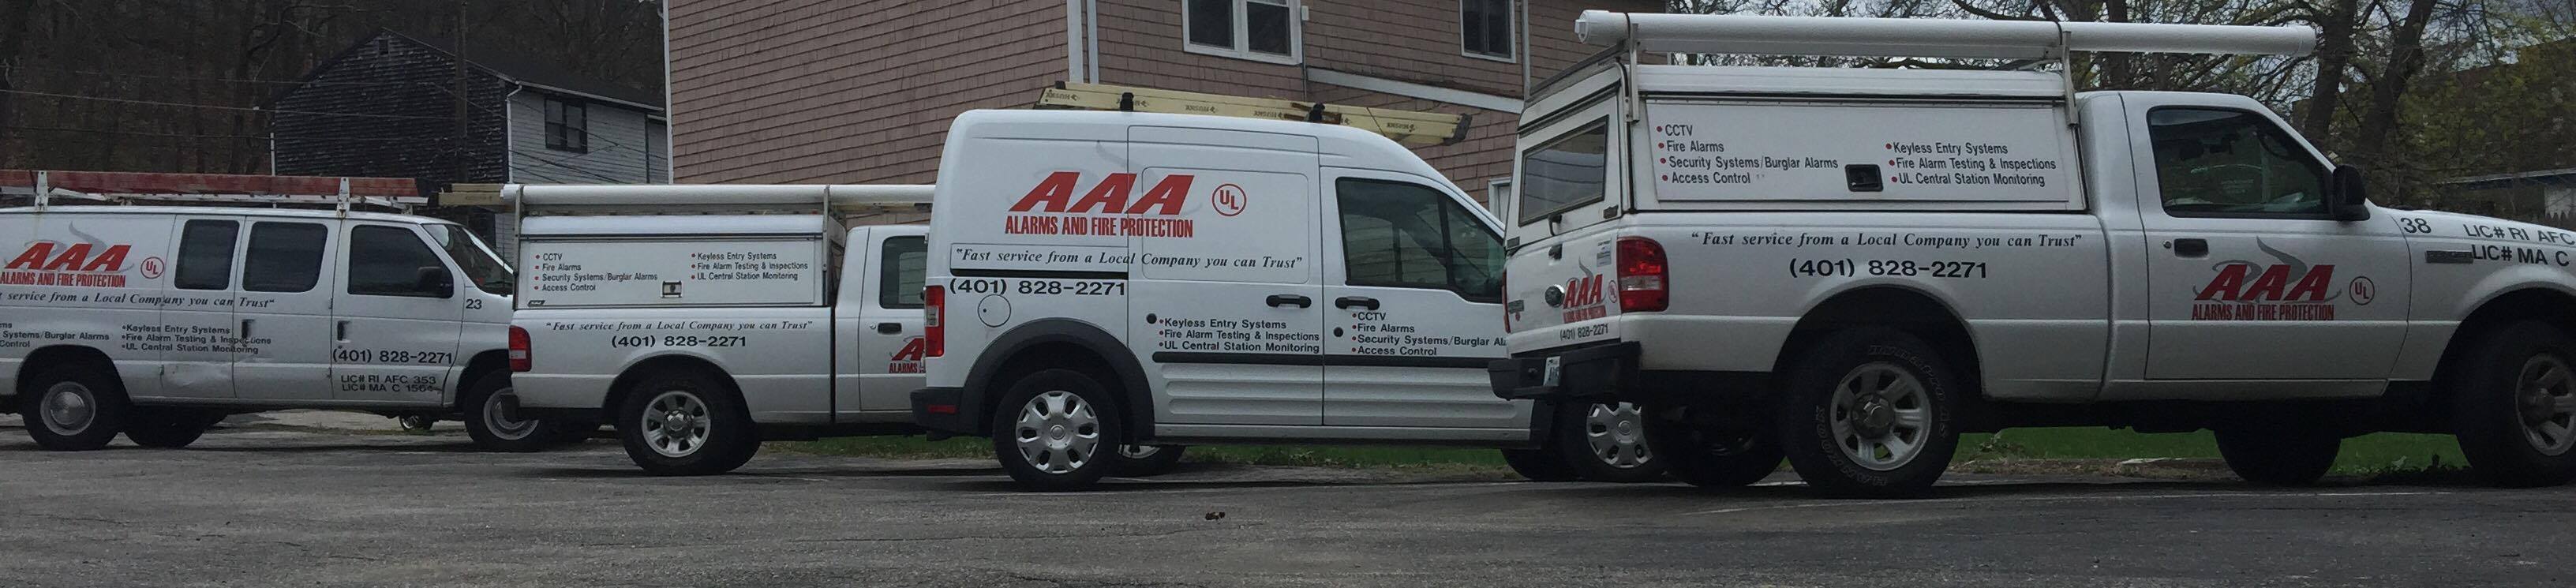 AAA Alarms and Fire Protection